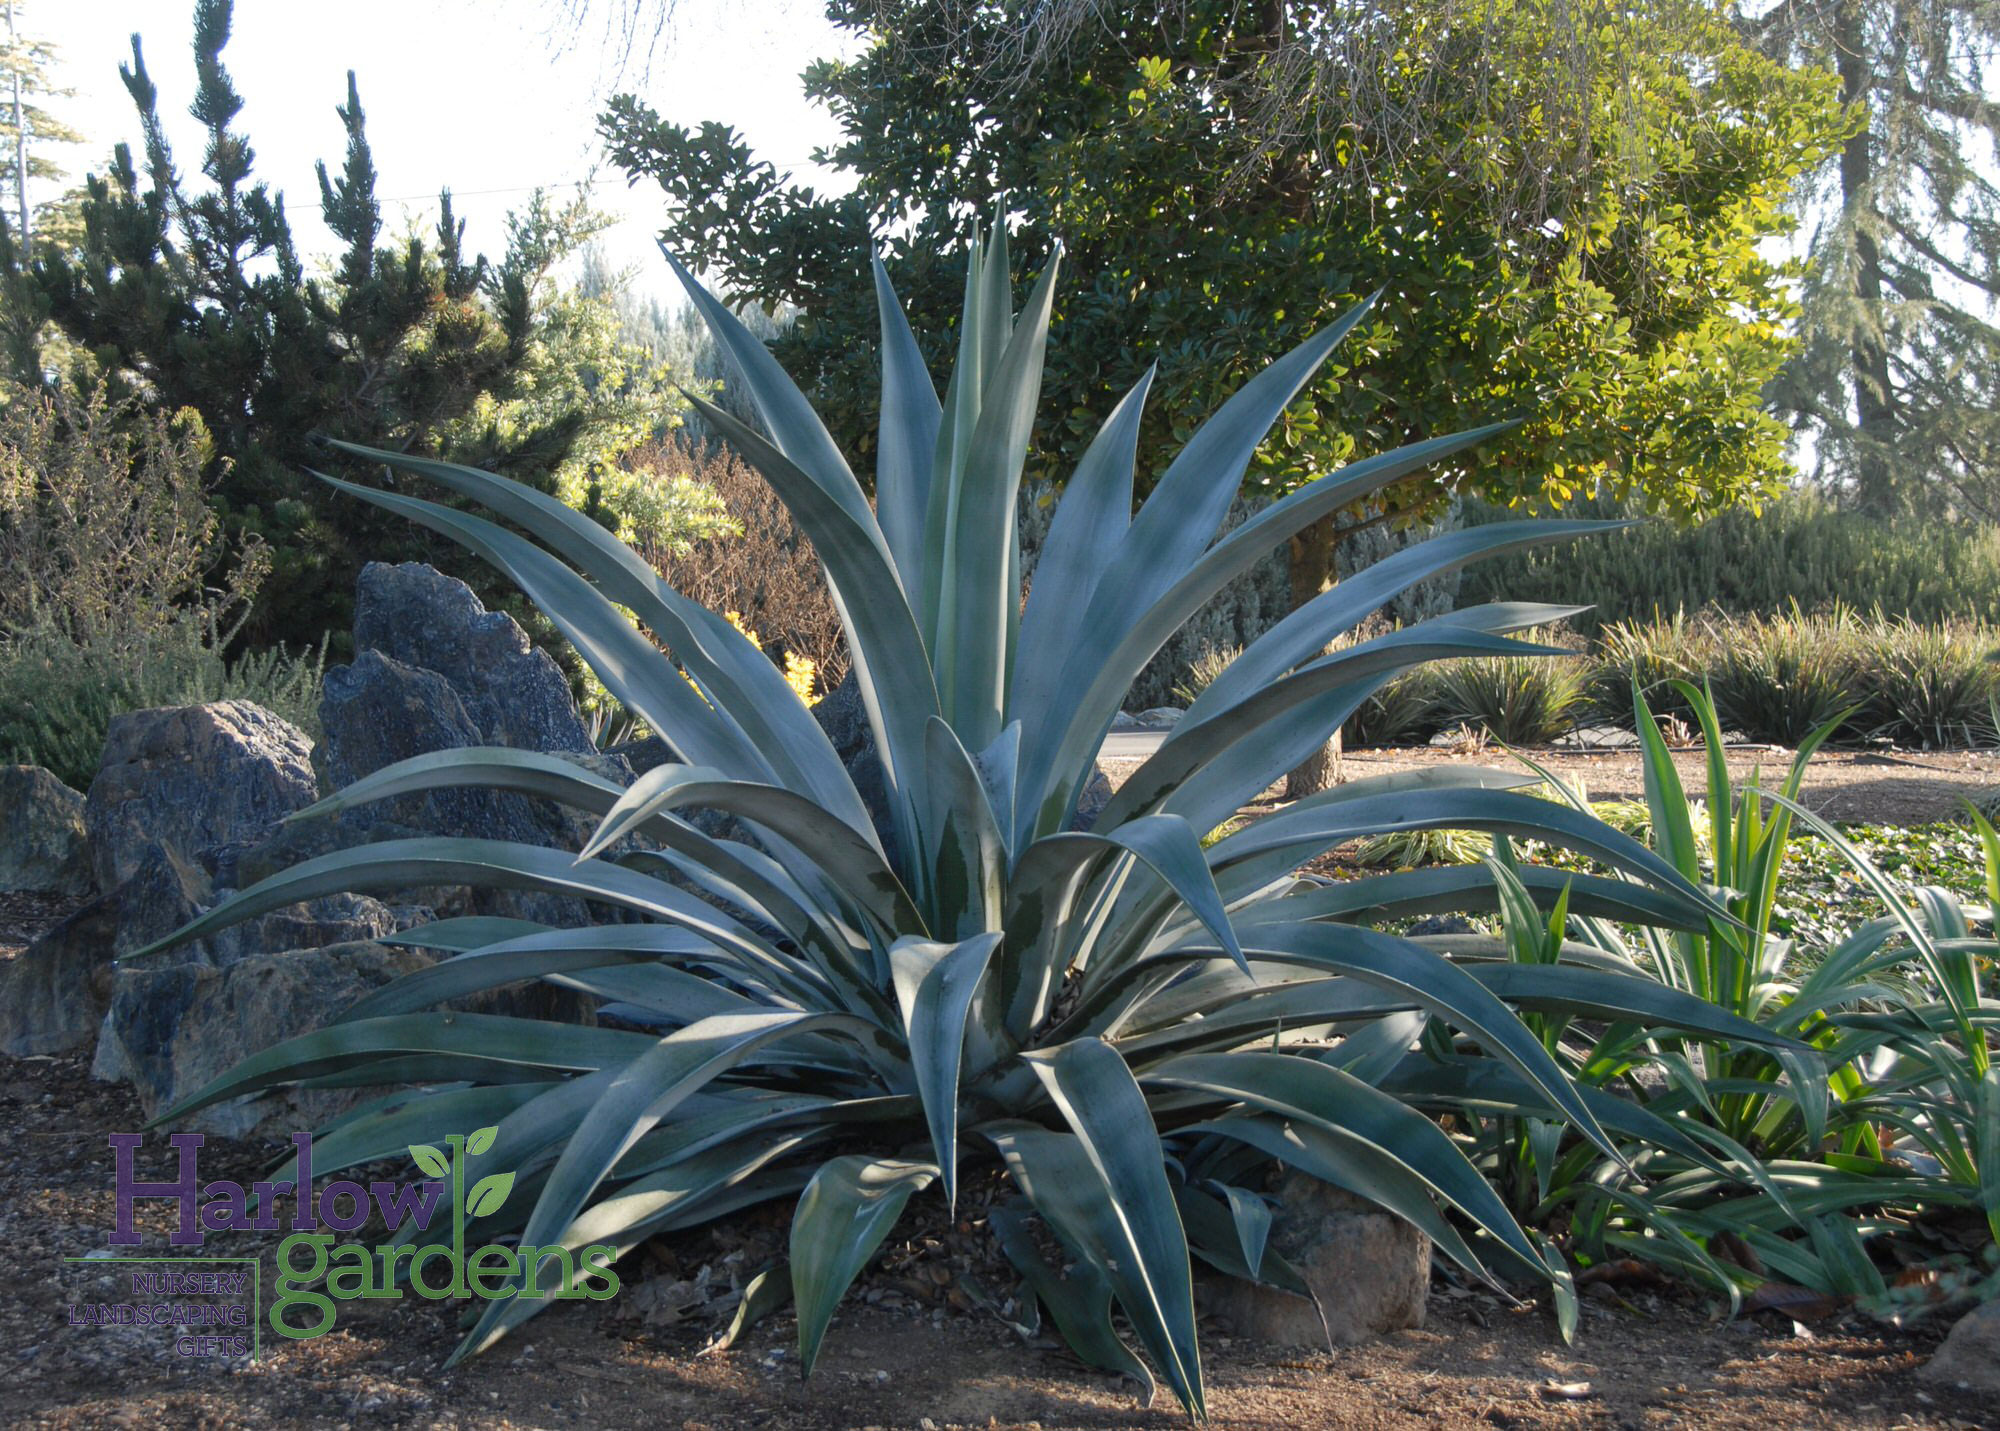 Weber Agave for sale at Harlow Gardens Tucson.